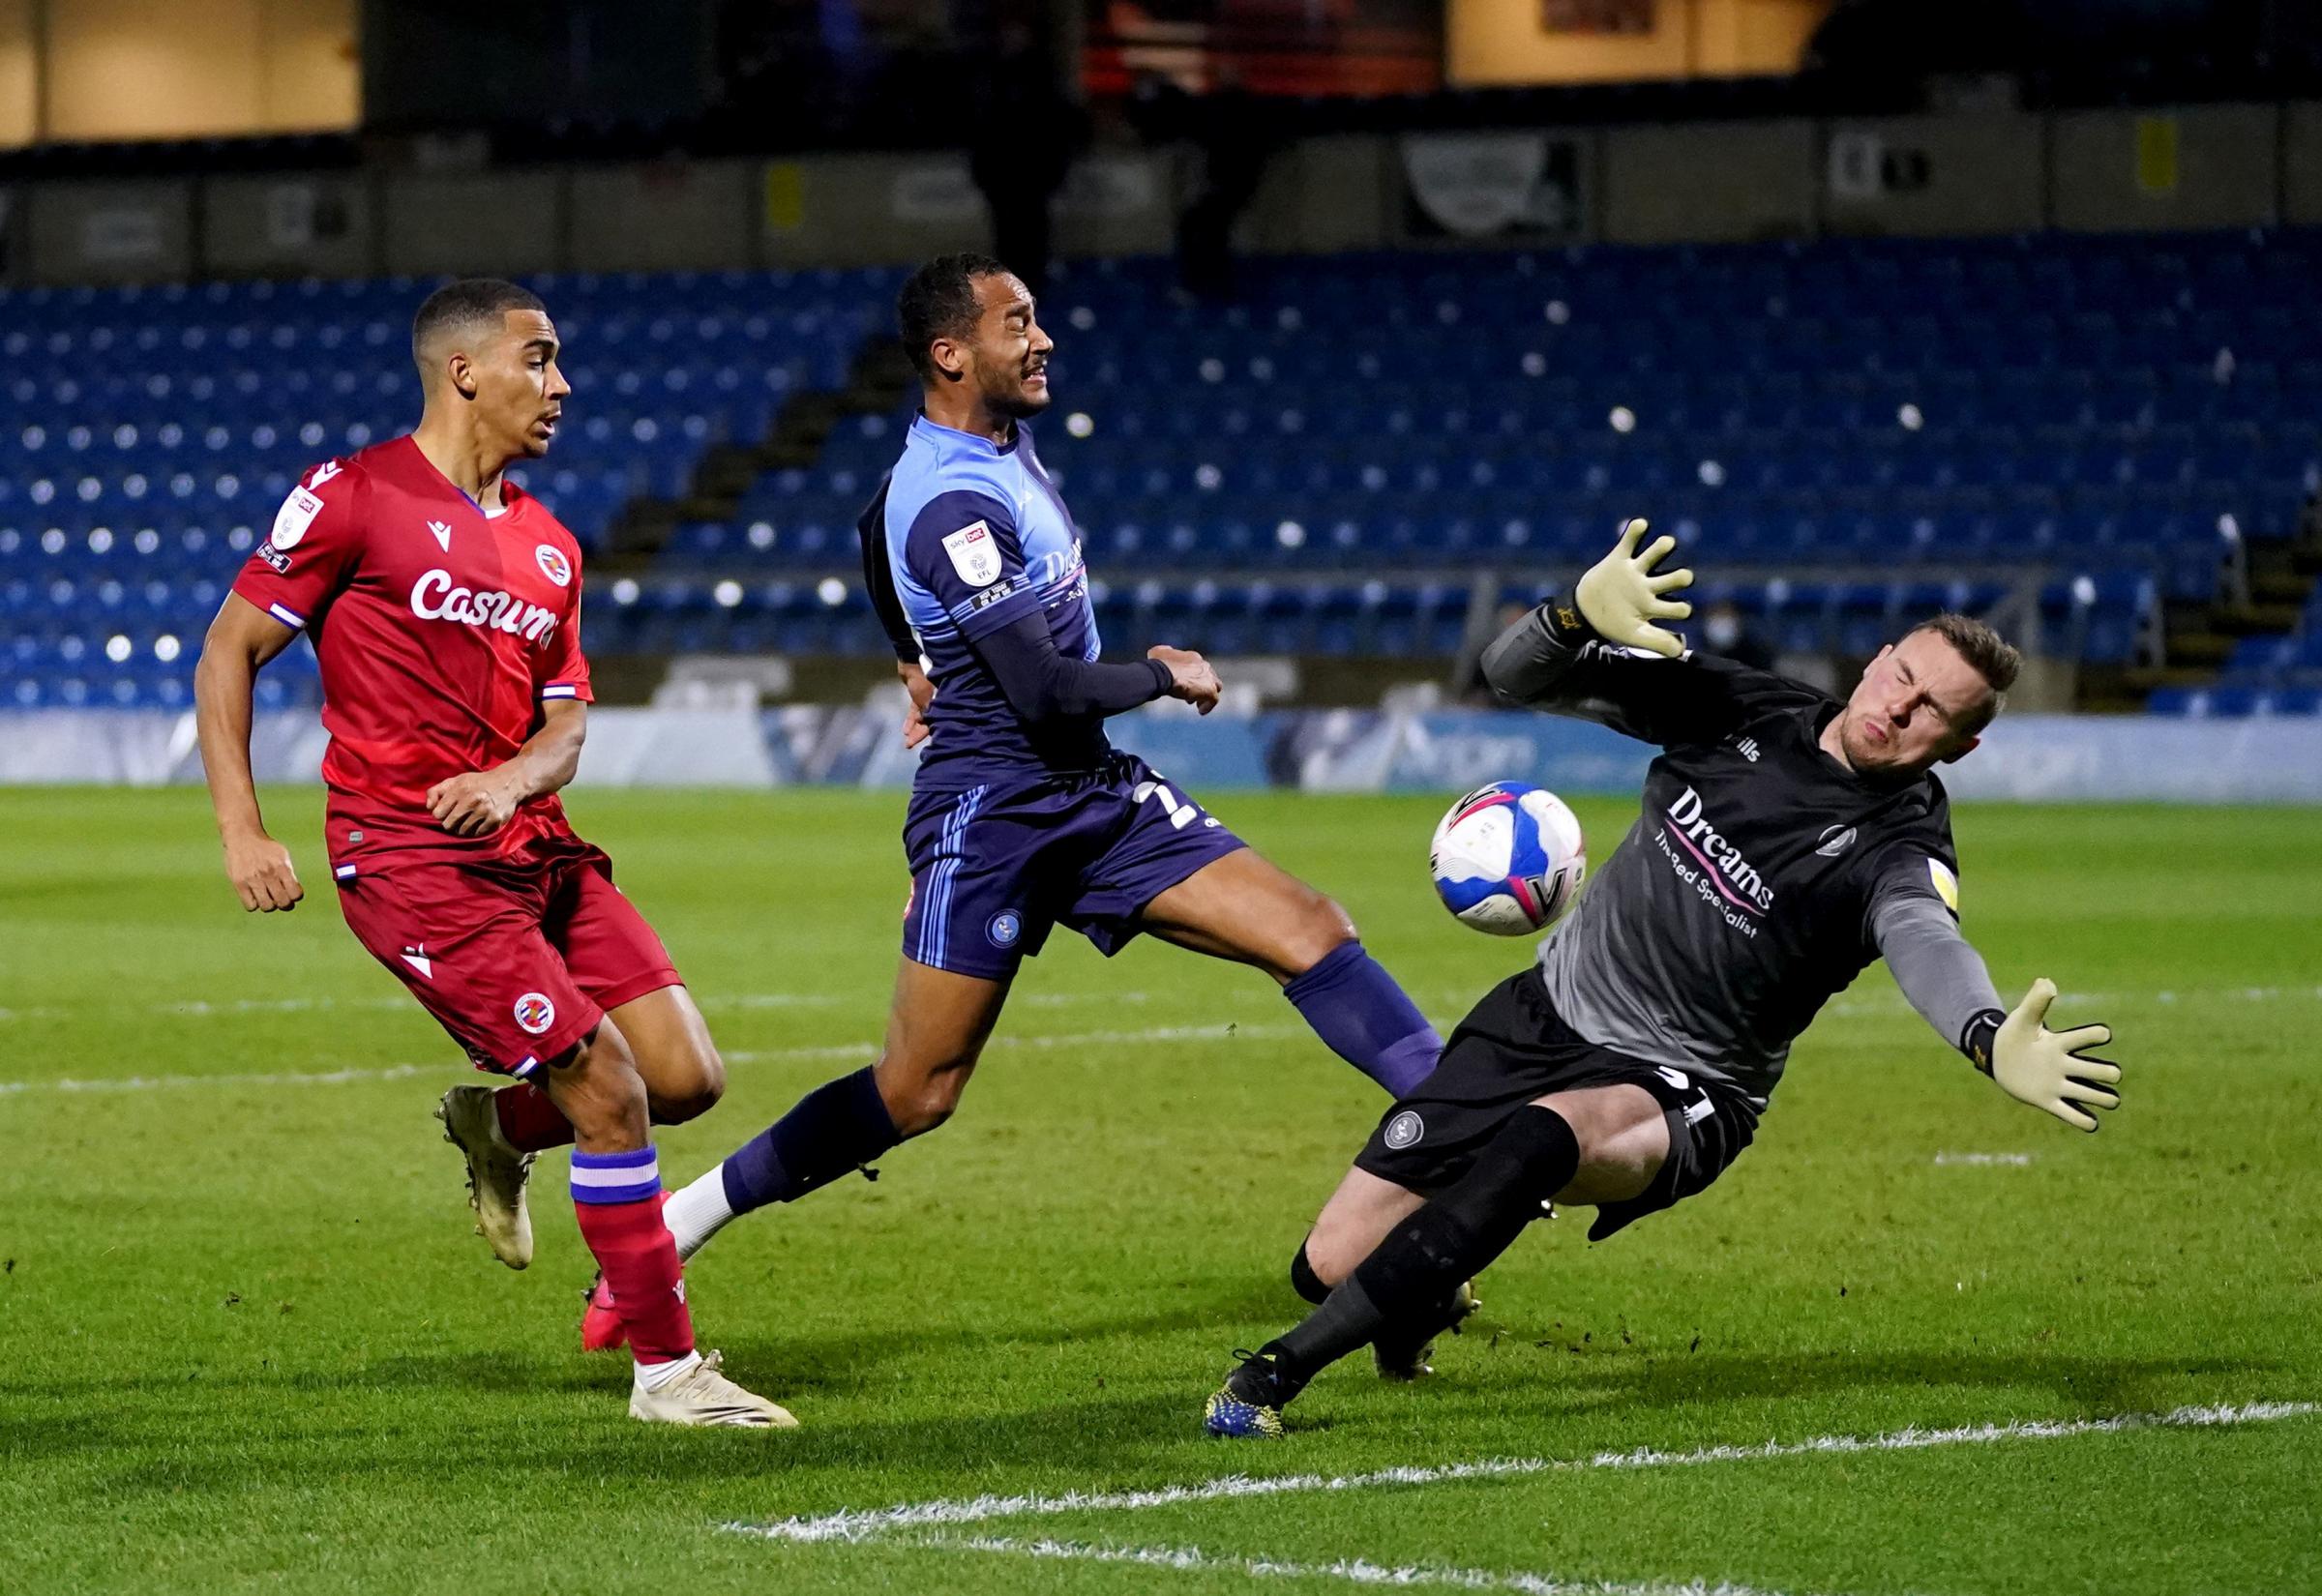 David Stockdale made two very good saves in Wycombes 1-0 win over Reading (PA)